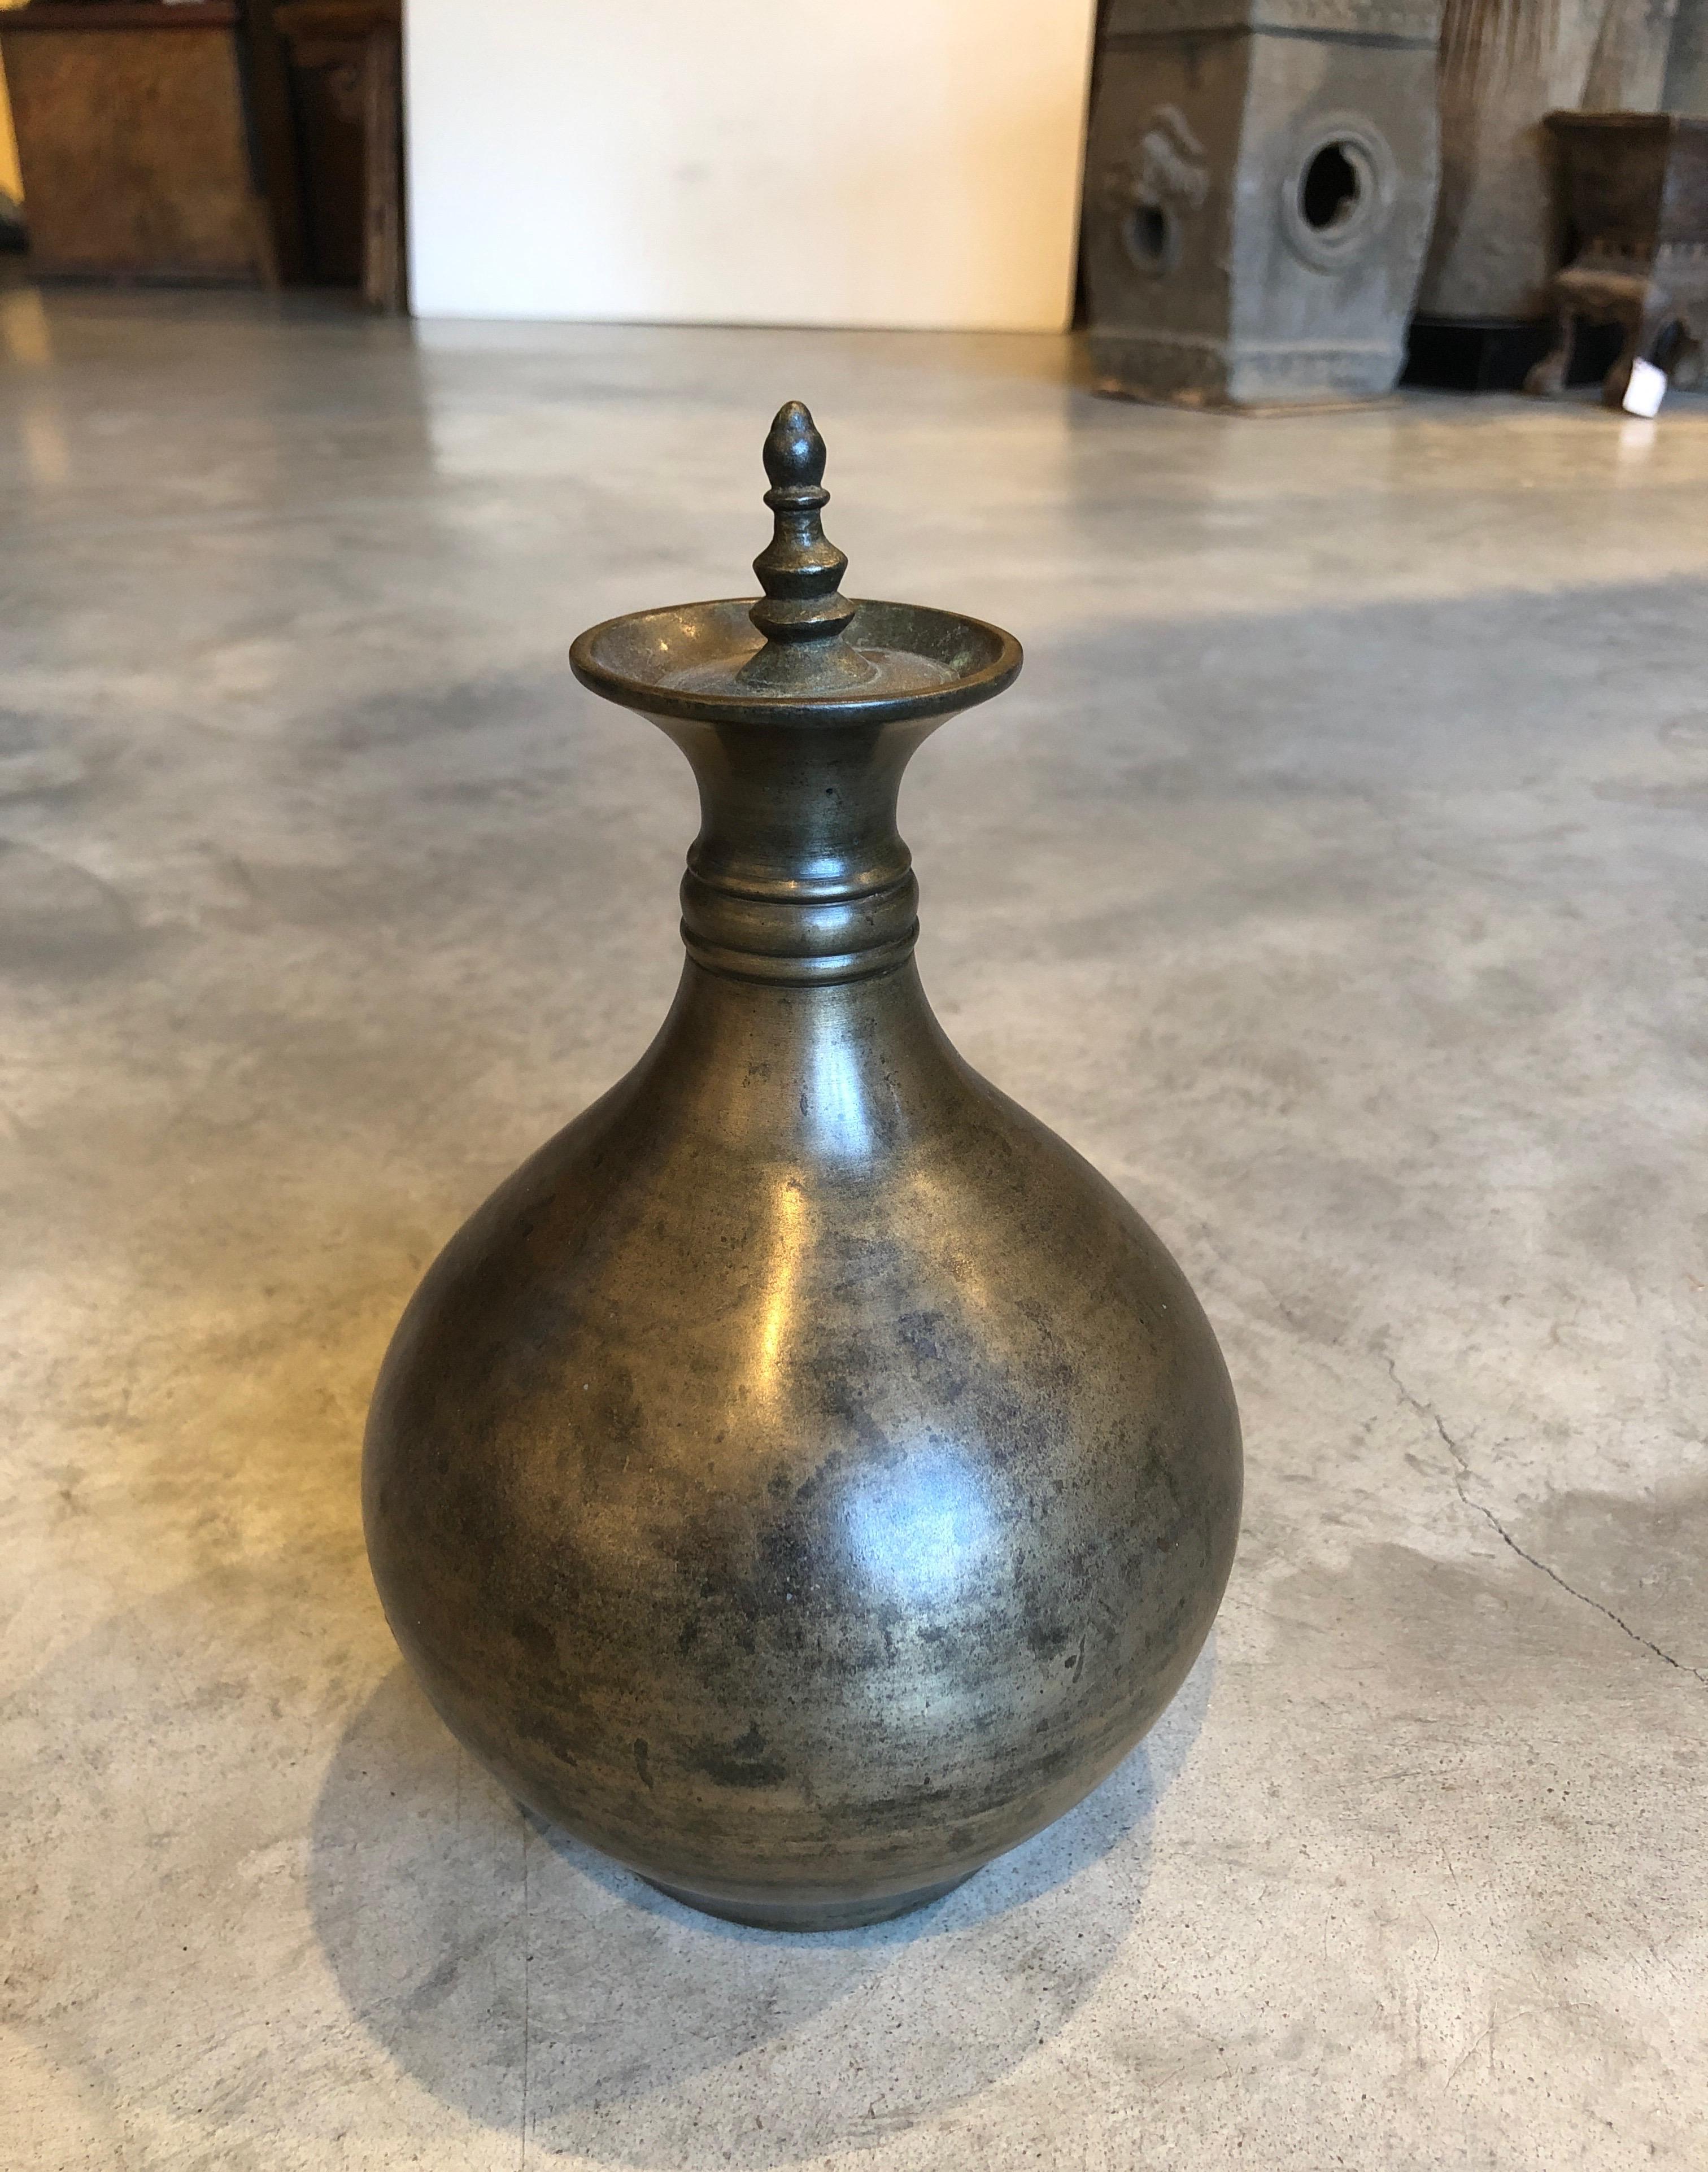 A graceful, well cast and simply designed bronze holy water container. From India, circa 1900 or earlier, this piece will add interest and beauty to any table or shelf. This kind of piece was used daily in rituals, often in a temple setting. The